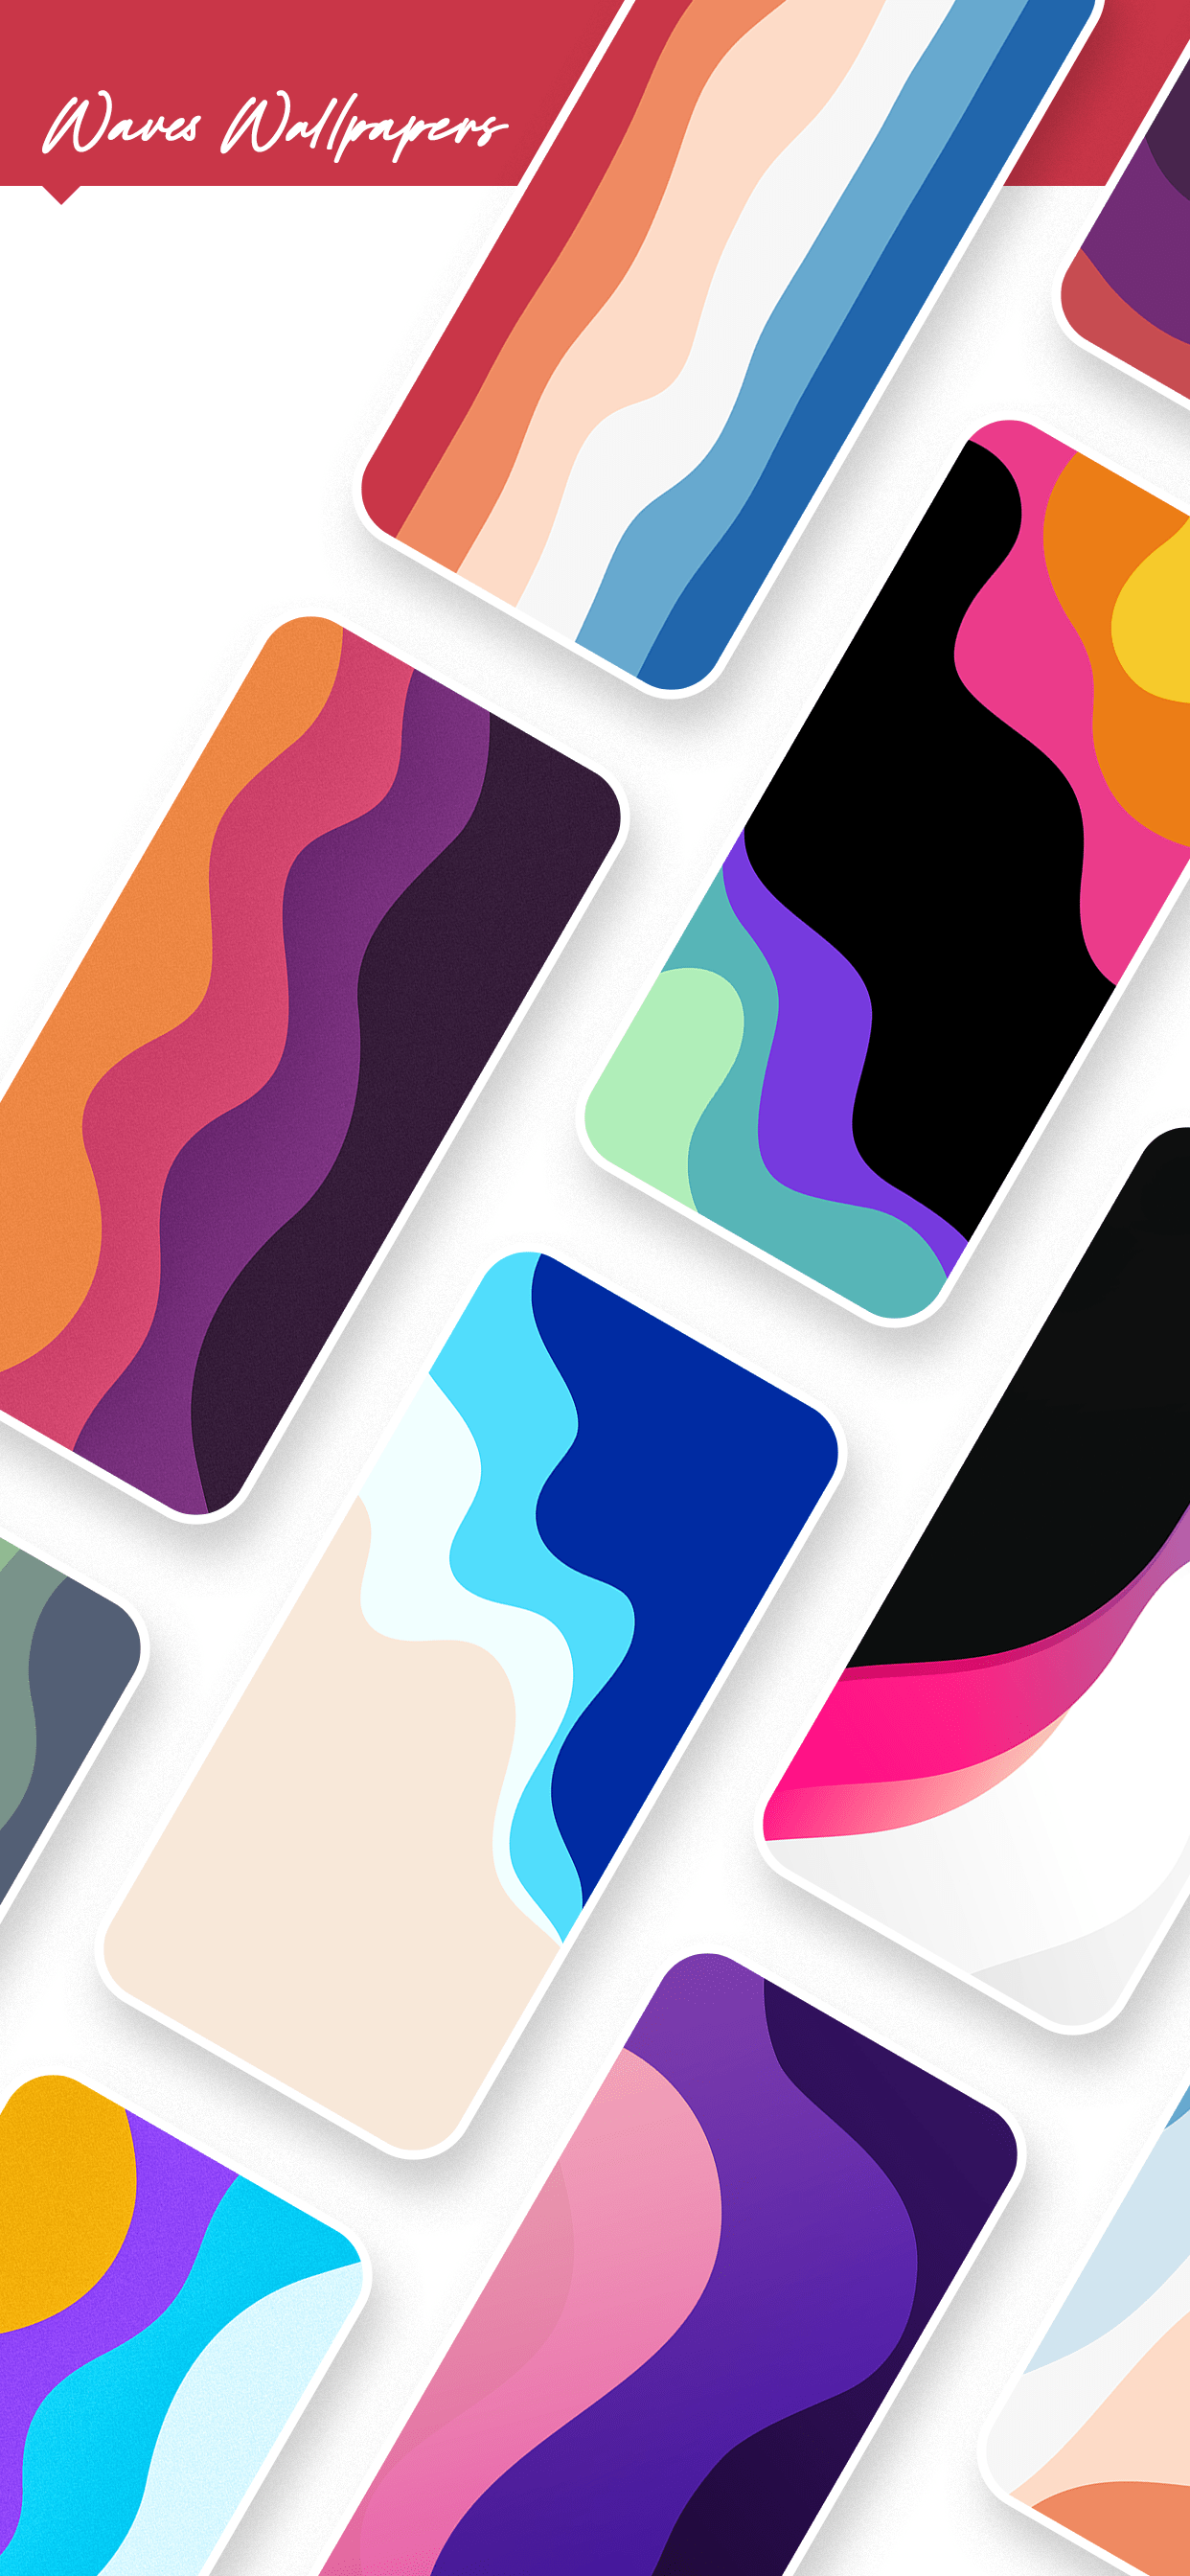 Waves-Wallpapers-2.png